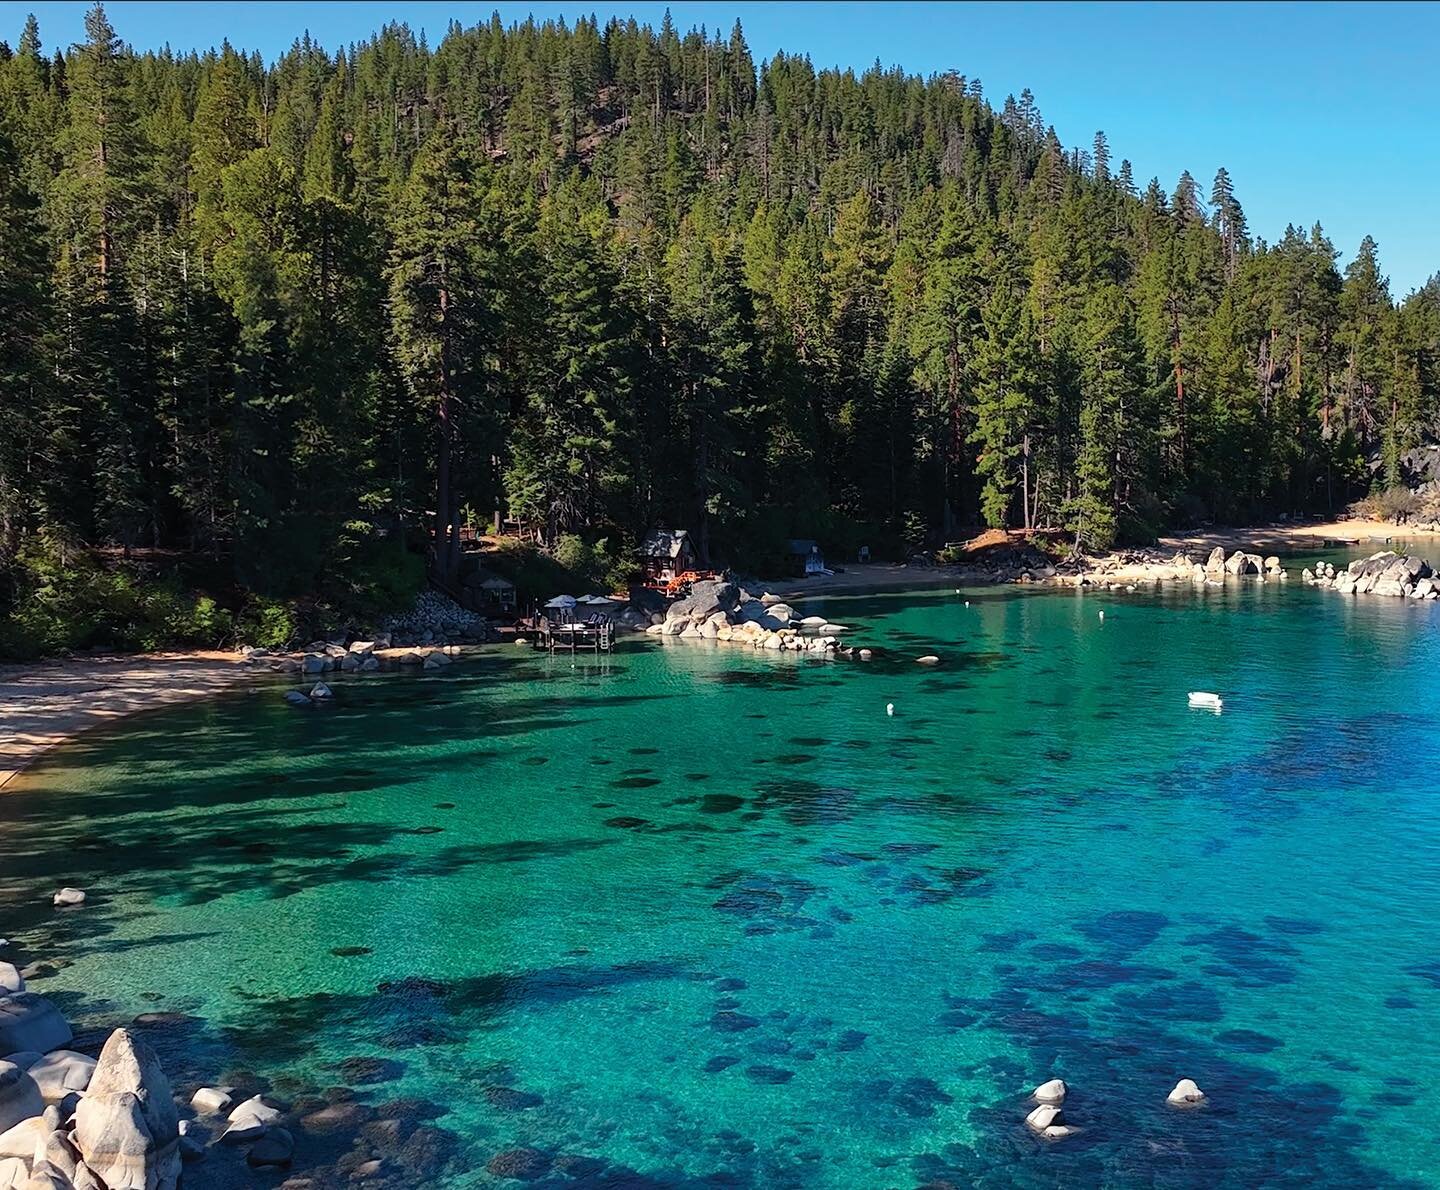 Overall &amp; Hamilton Group&nbsp;is an accomplished and respected team, specializing in luxury resort properties across Lake Tahoe. With $1 Billion+ in total sales volume, 2,000+ satisfied clients, and $550K+ in charitable giving, they rank as the #